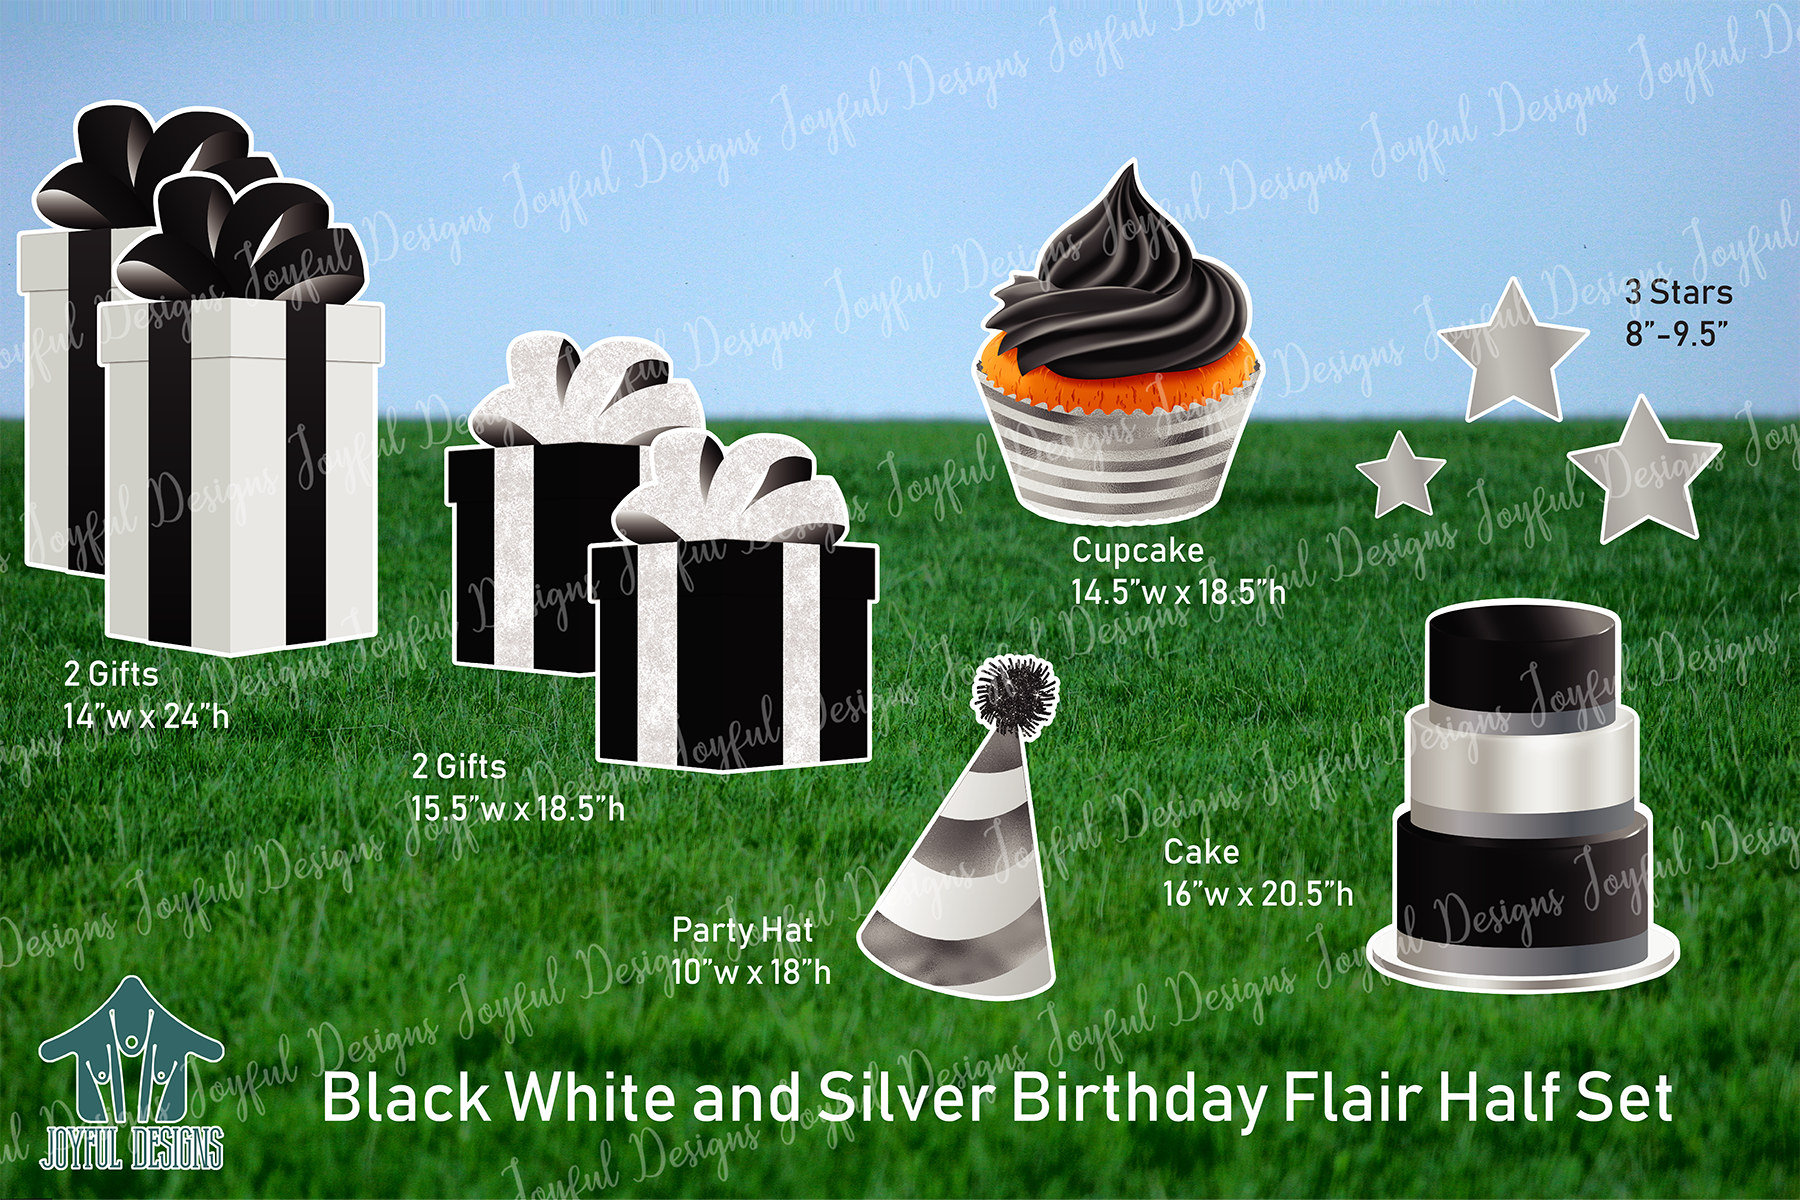 Black, White & Silver "One and Done" Birthday Set